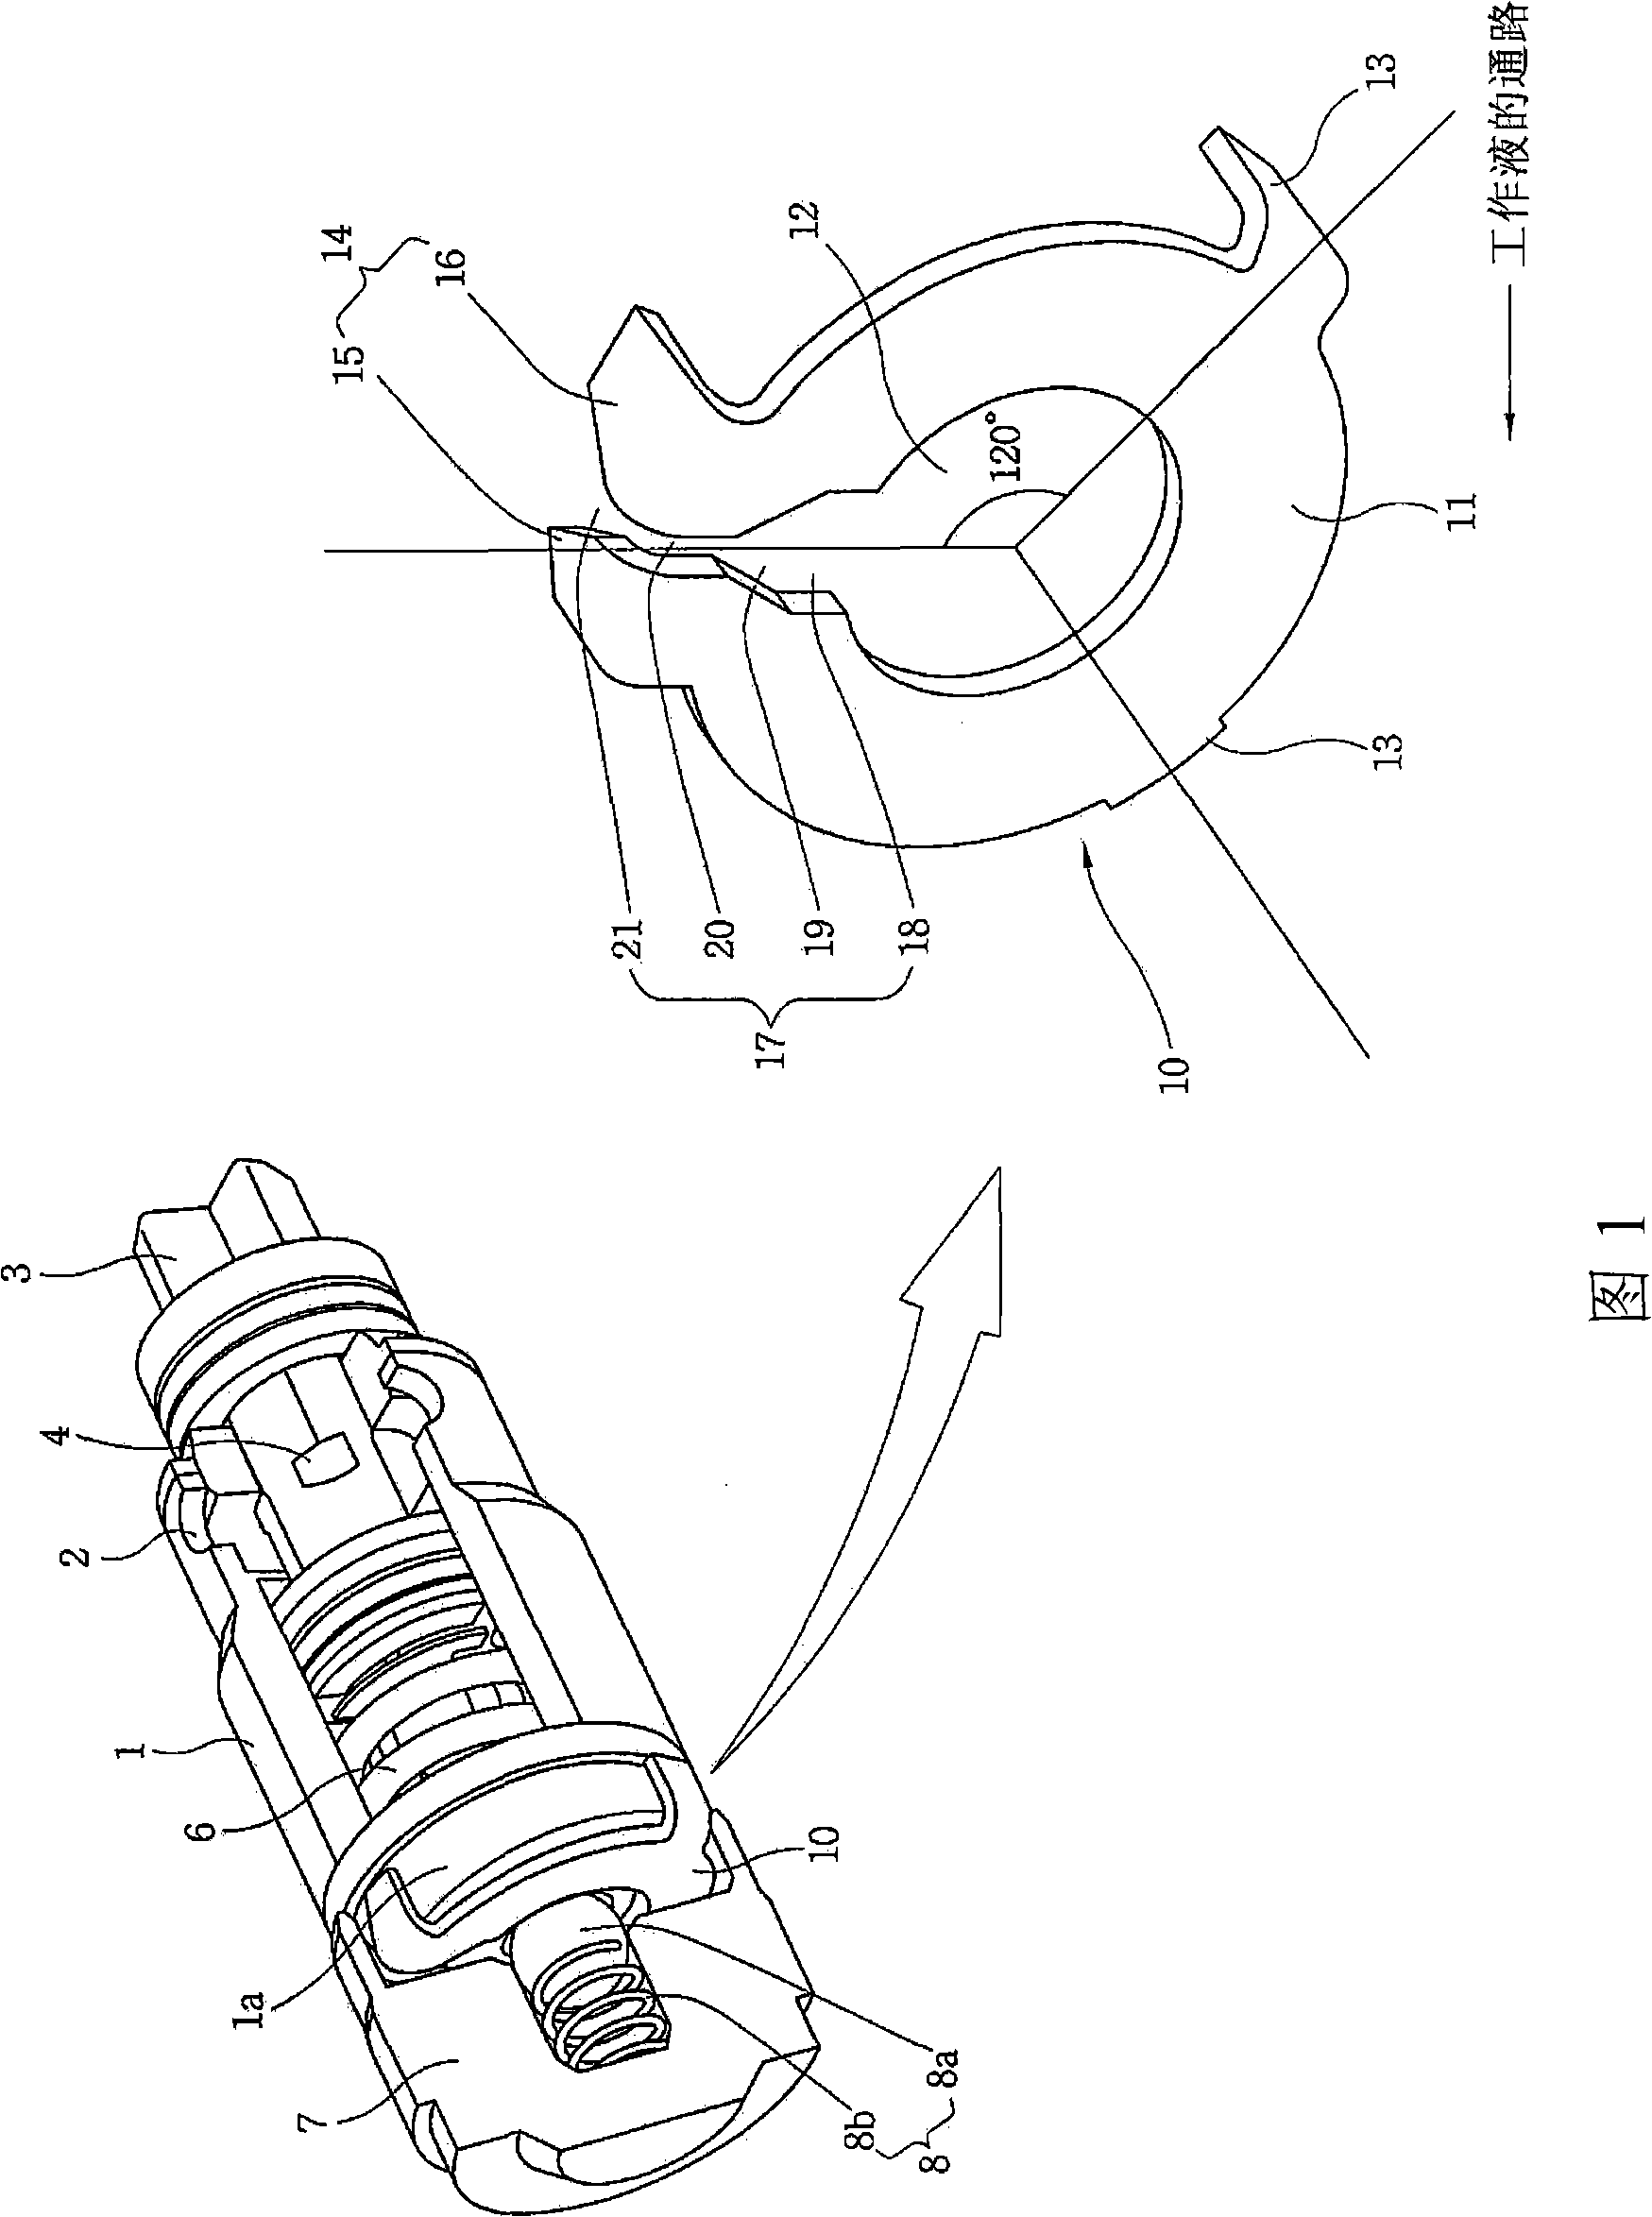 Pressure type pump reducing pulsation for vehicle slip control system